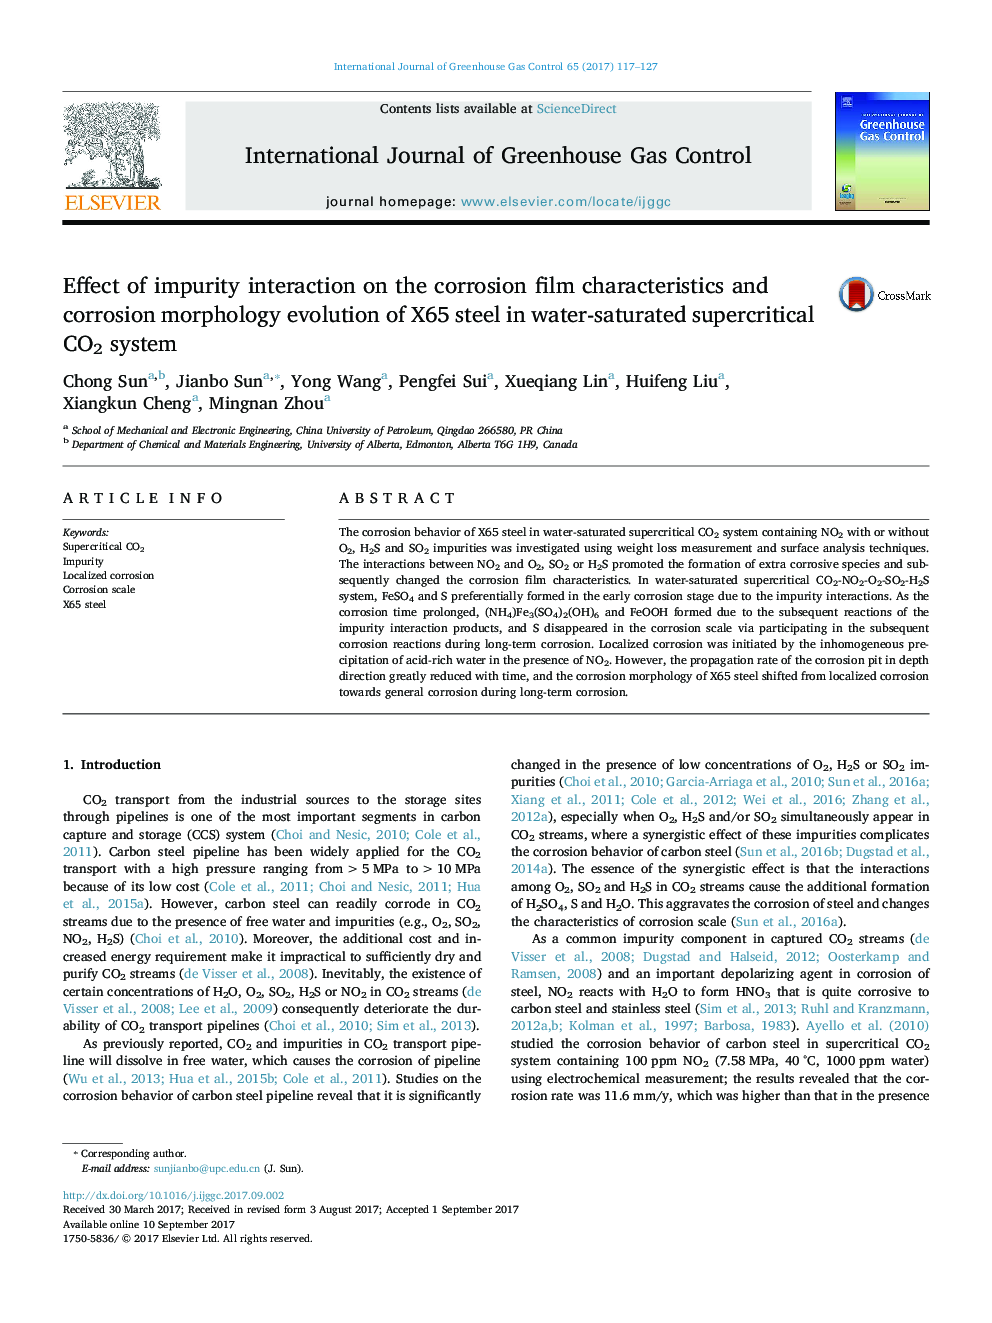 Effect of impurity interaction on the corrosion film characteristics and corrosion morphology evolution of X65 steel in water-saturated supercritical CO2 system